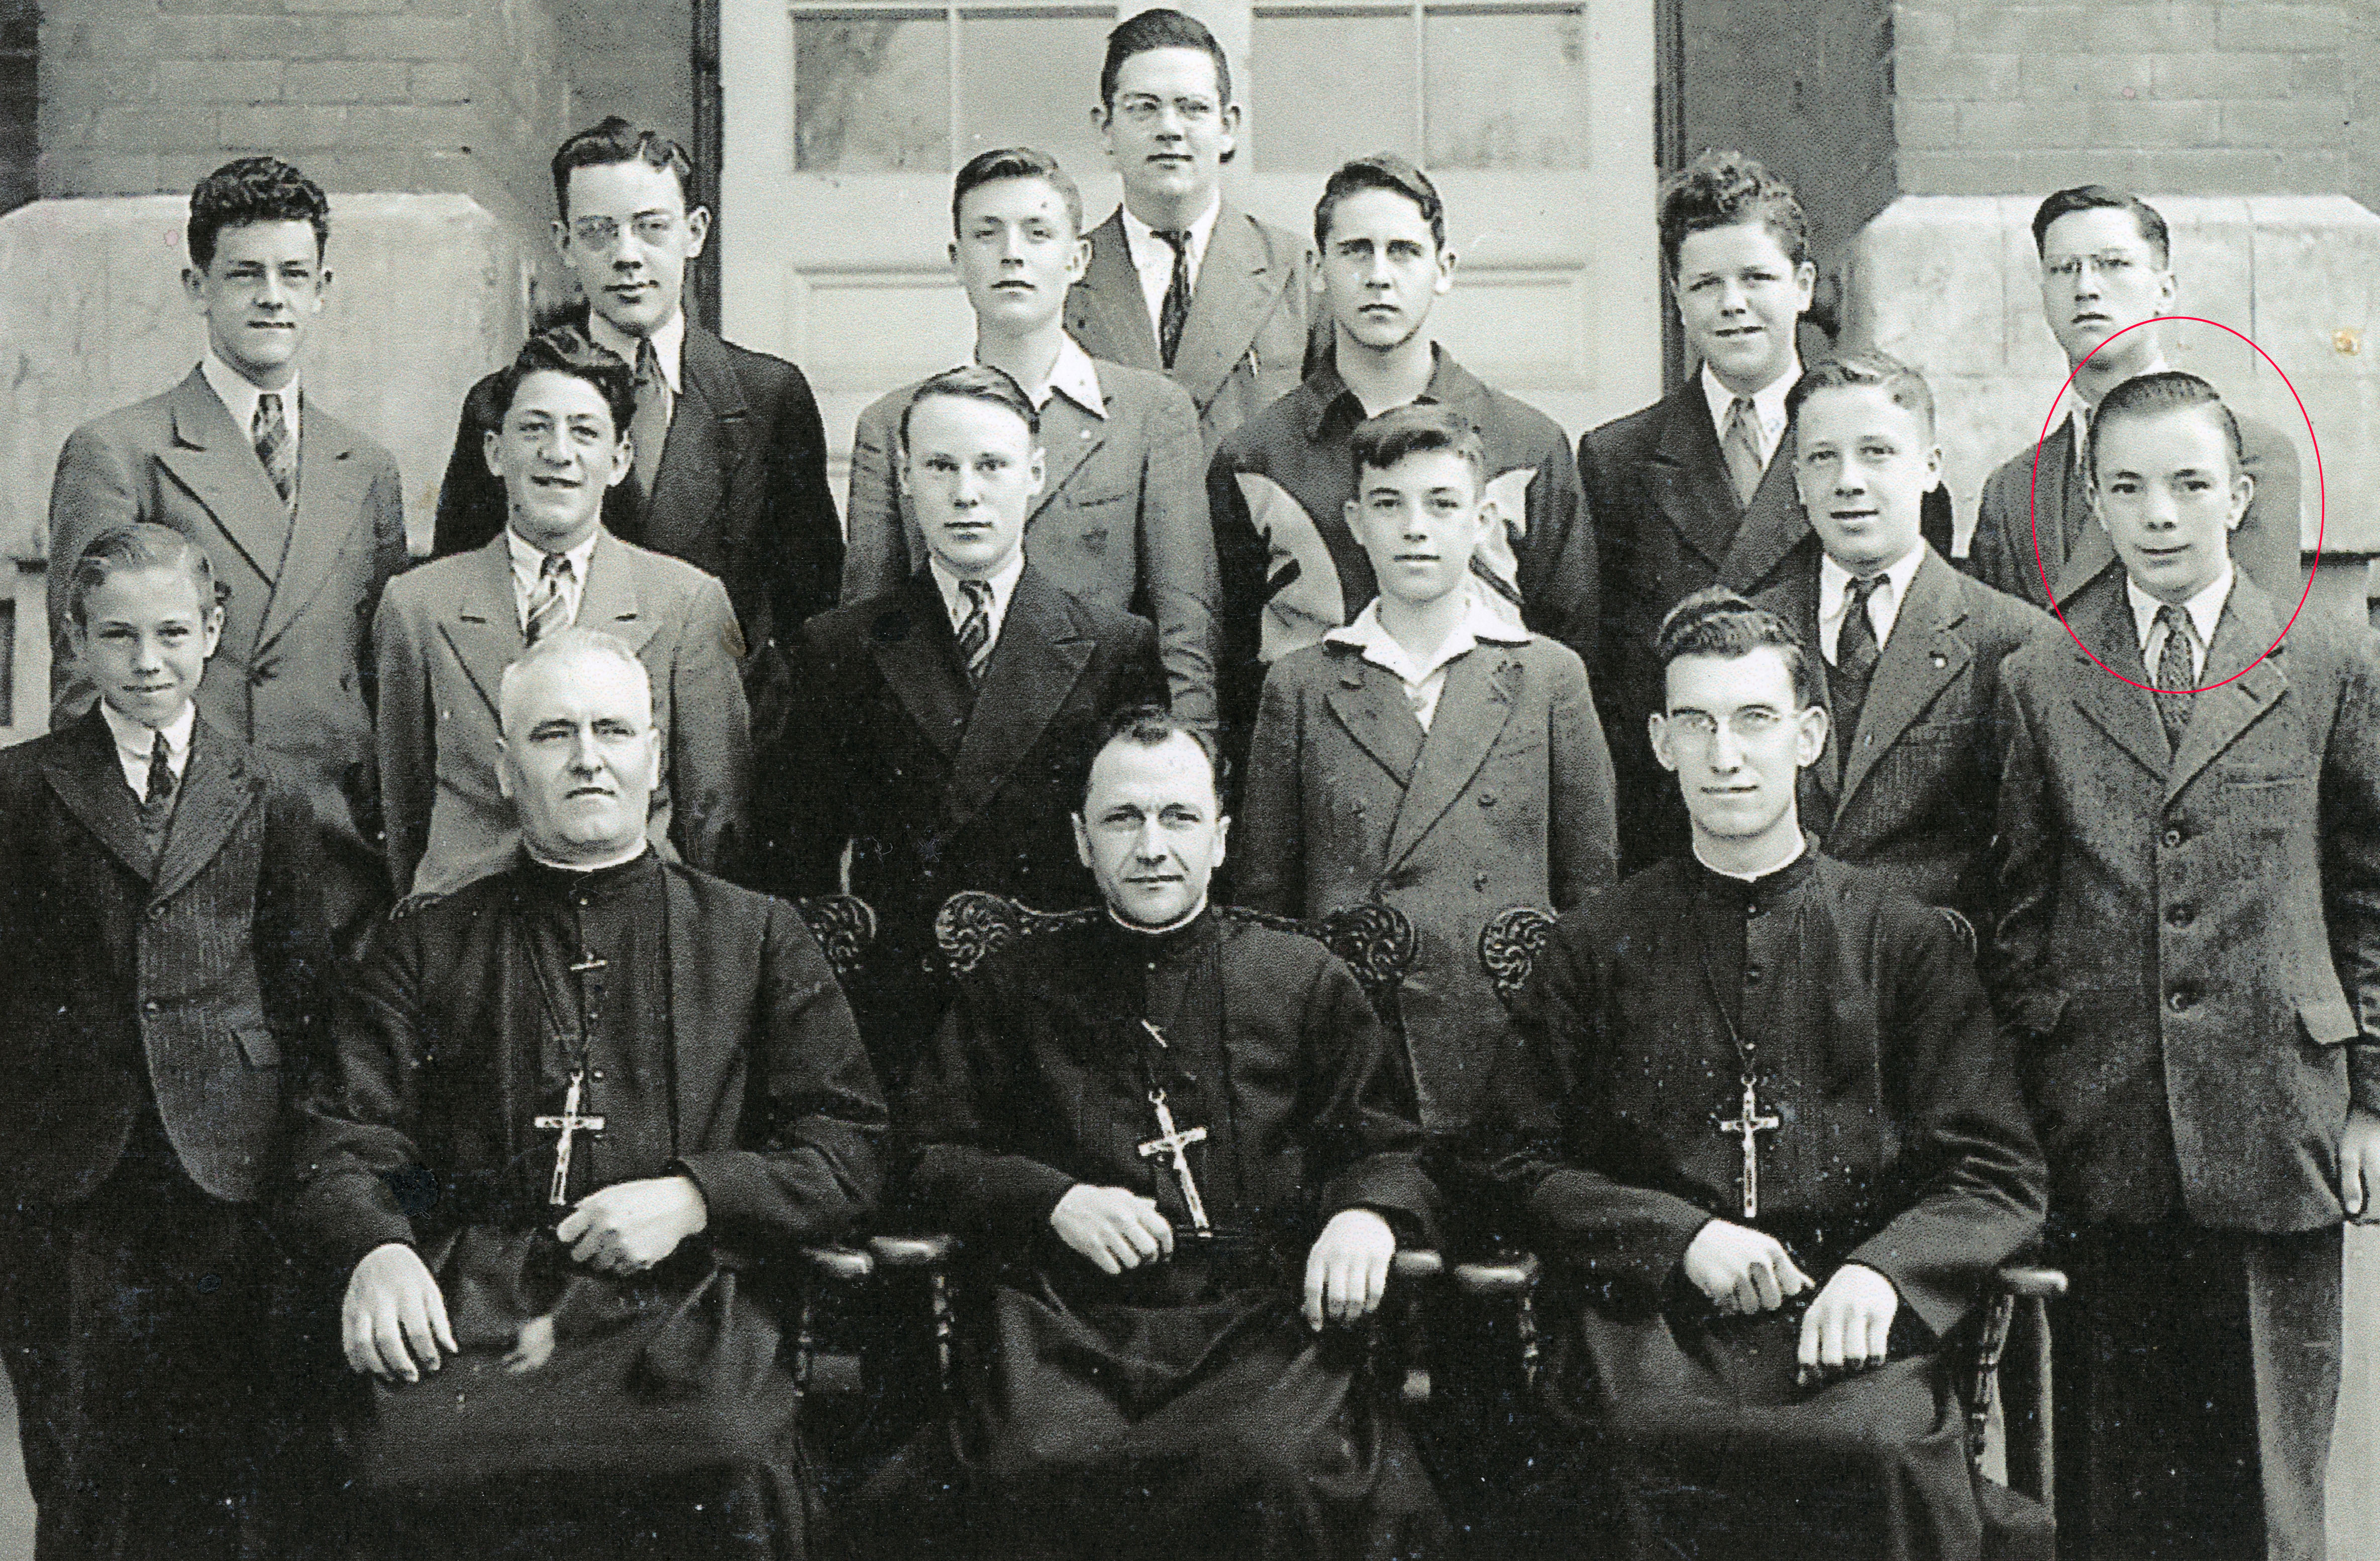 Class photo, 13 young men and 3 priests